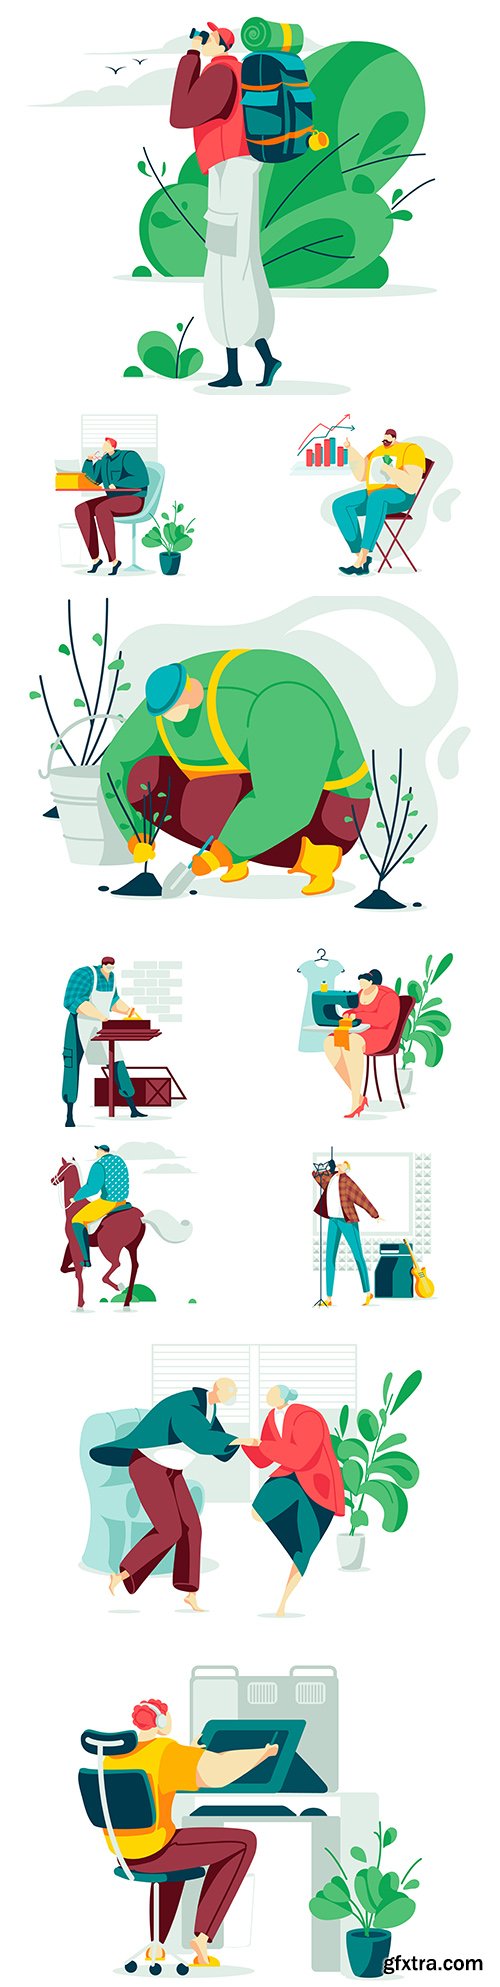 People of different professions and lifestyle flat design
